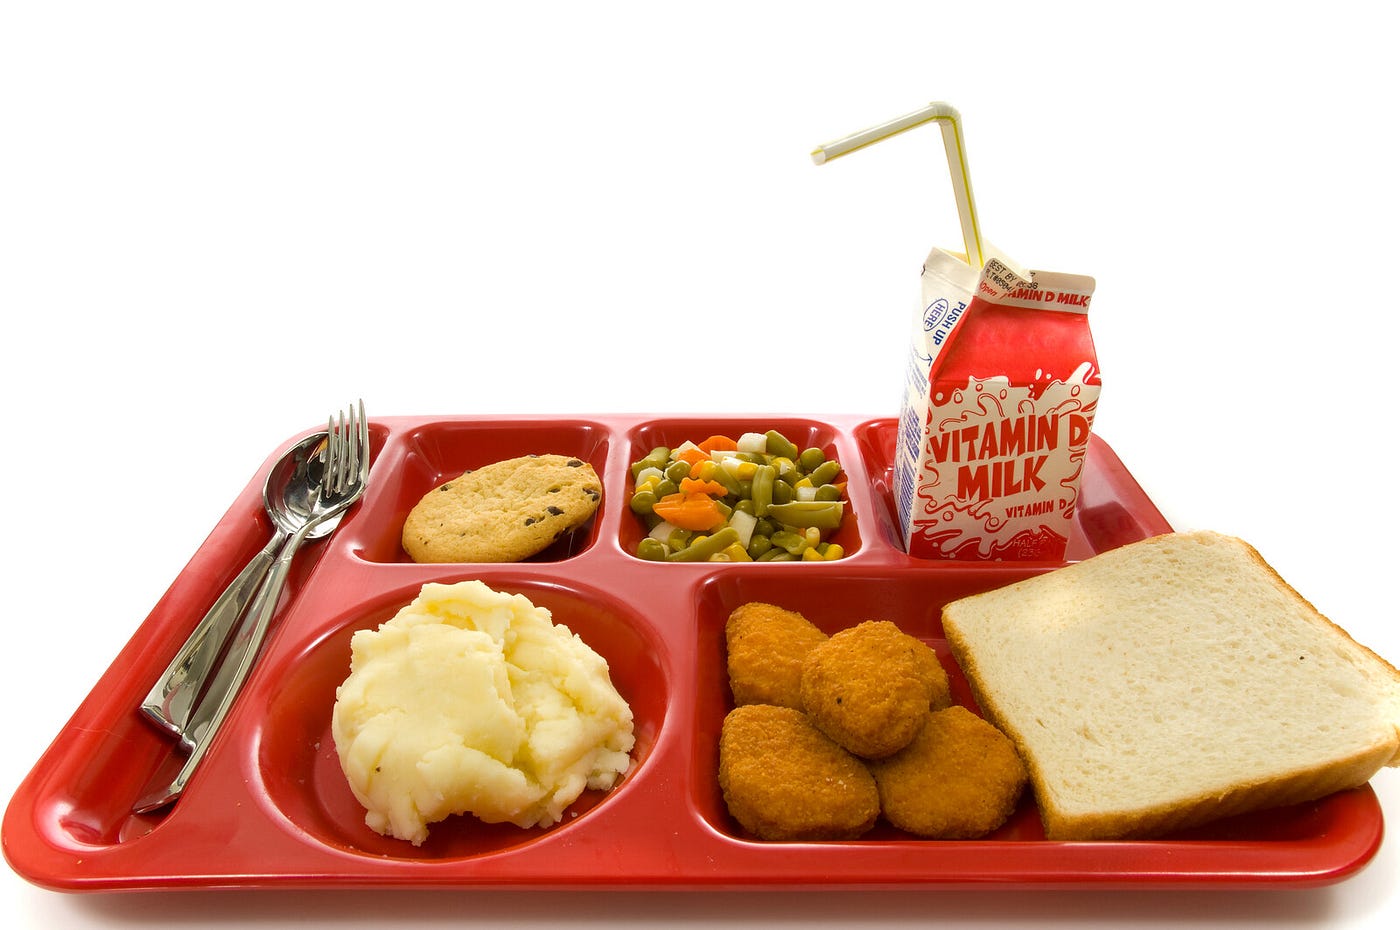 My Kids Eat Hot Lunch Every Day. Kids need food, not our